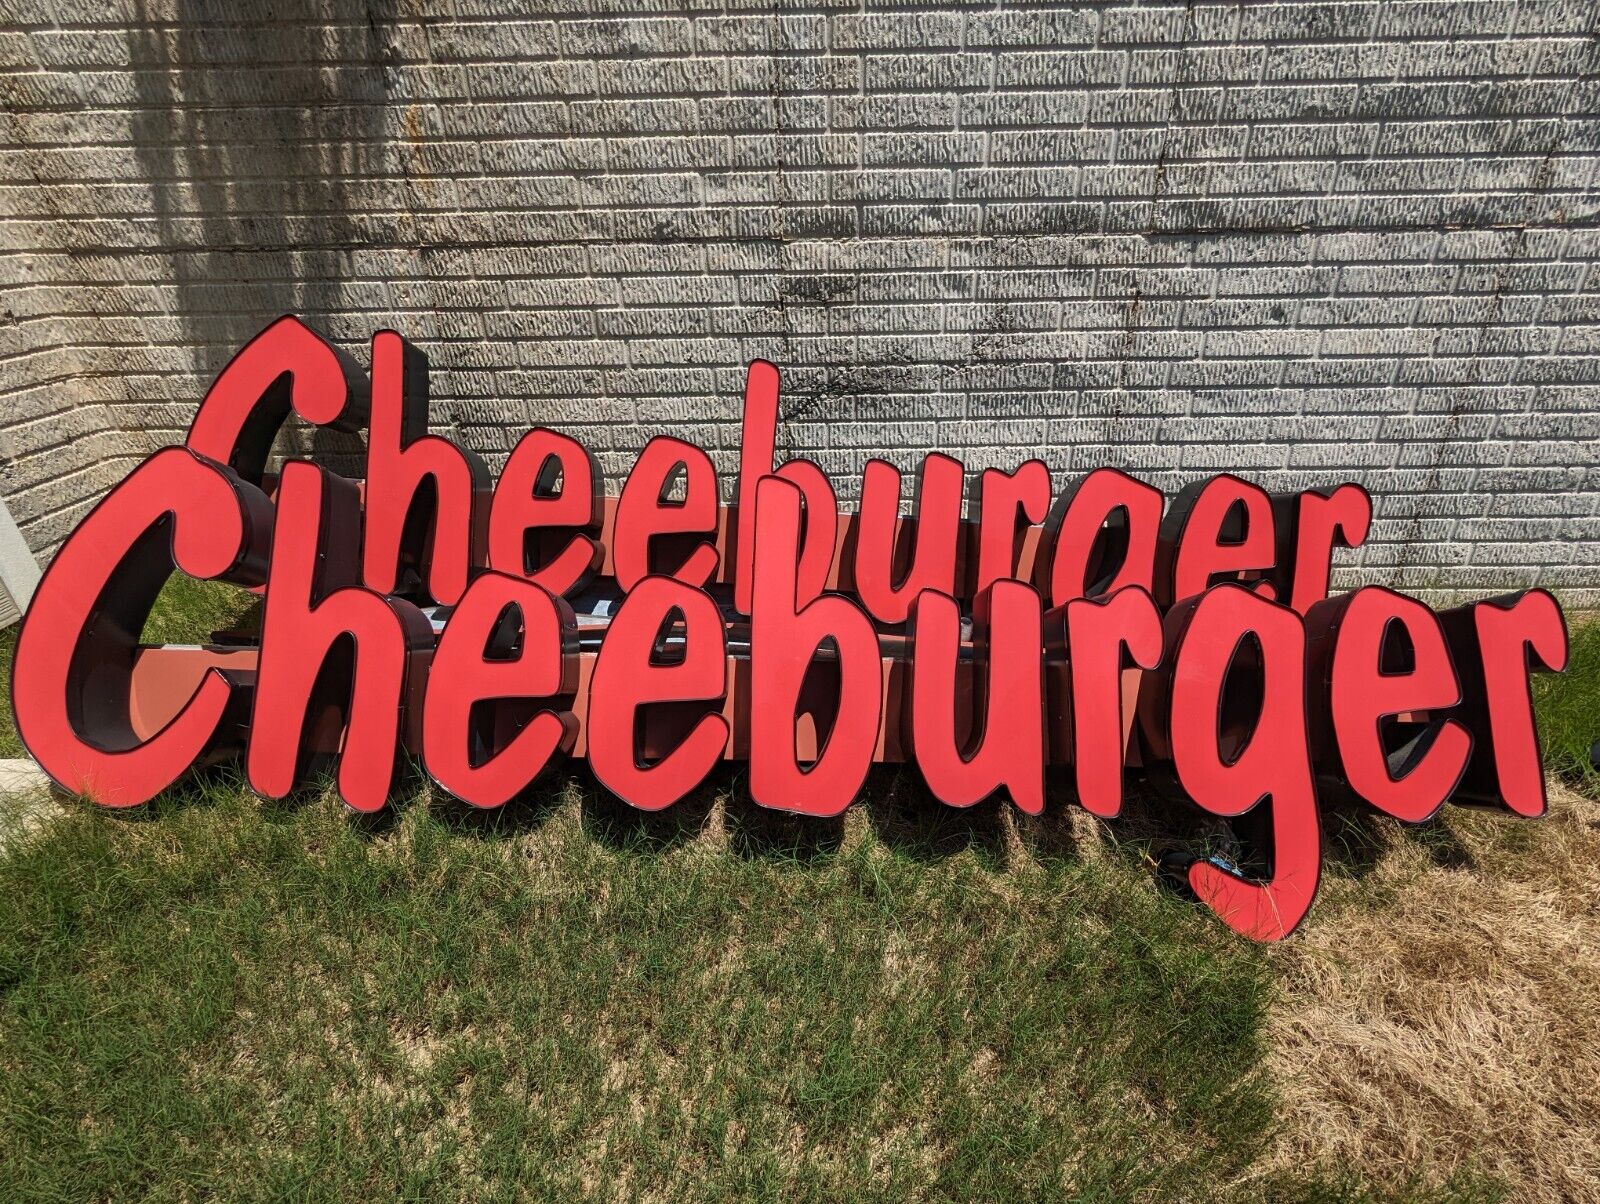 Full Size Cheeburger Restaurant Sign (Fully Functional)